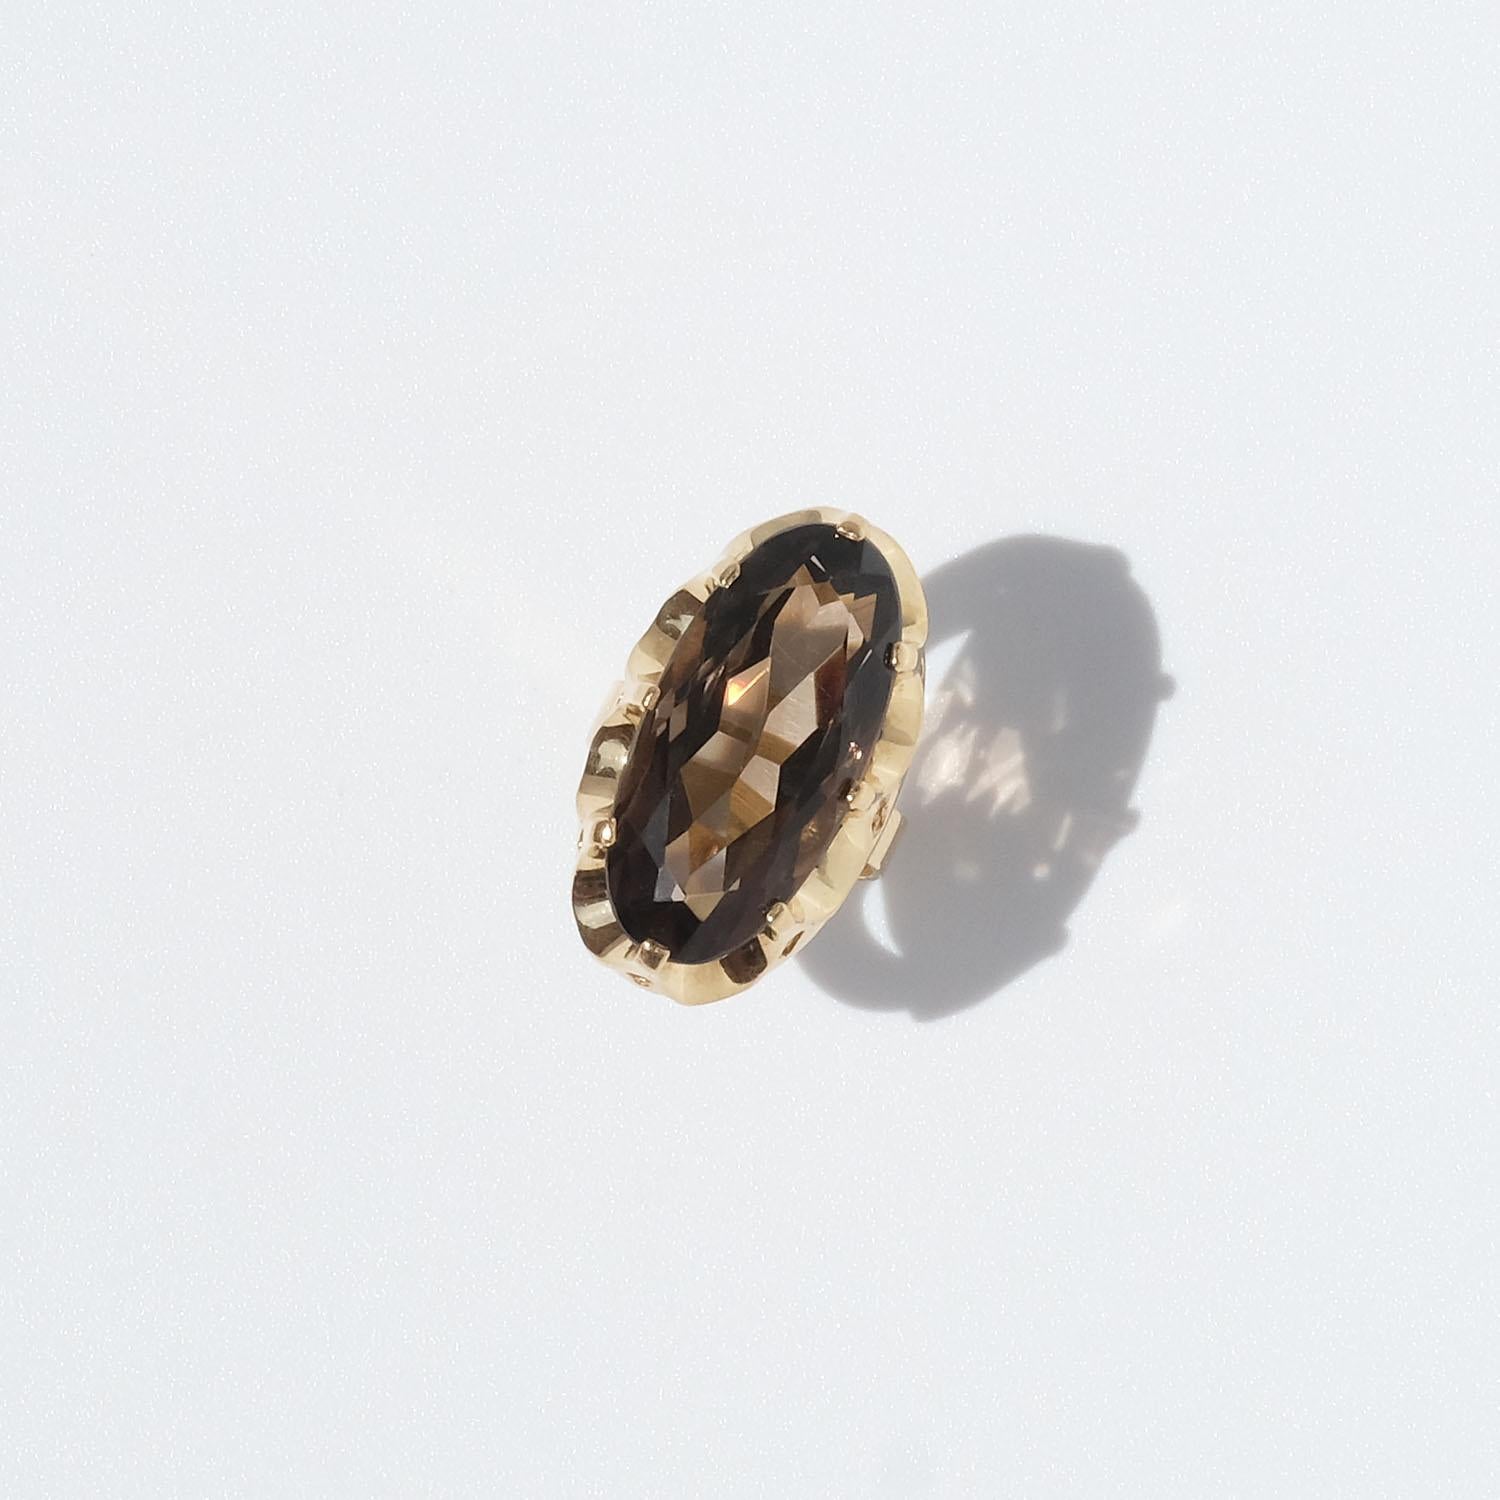 This 18 karat gold ring is adorned with an oval shaped, faceted smoky quartz. The smoky quartz is held by an amazing setting which resembles a king's crown. 
This is a cocktail ring worthy of the name. It is prominent but yet elegant.
The condition